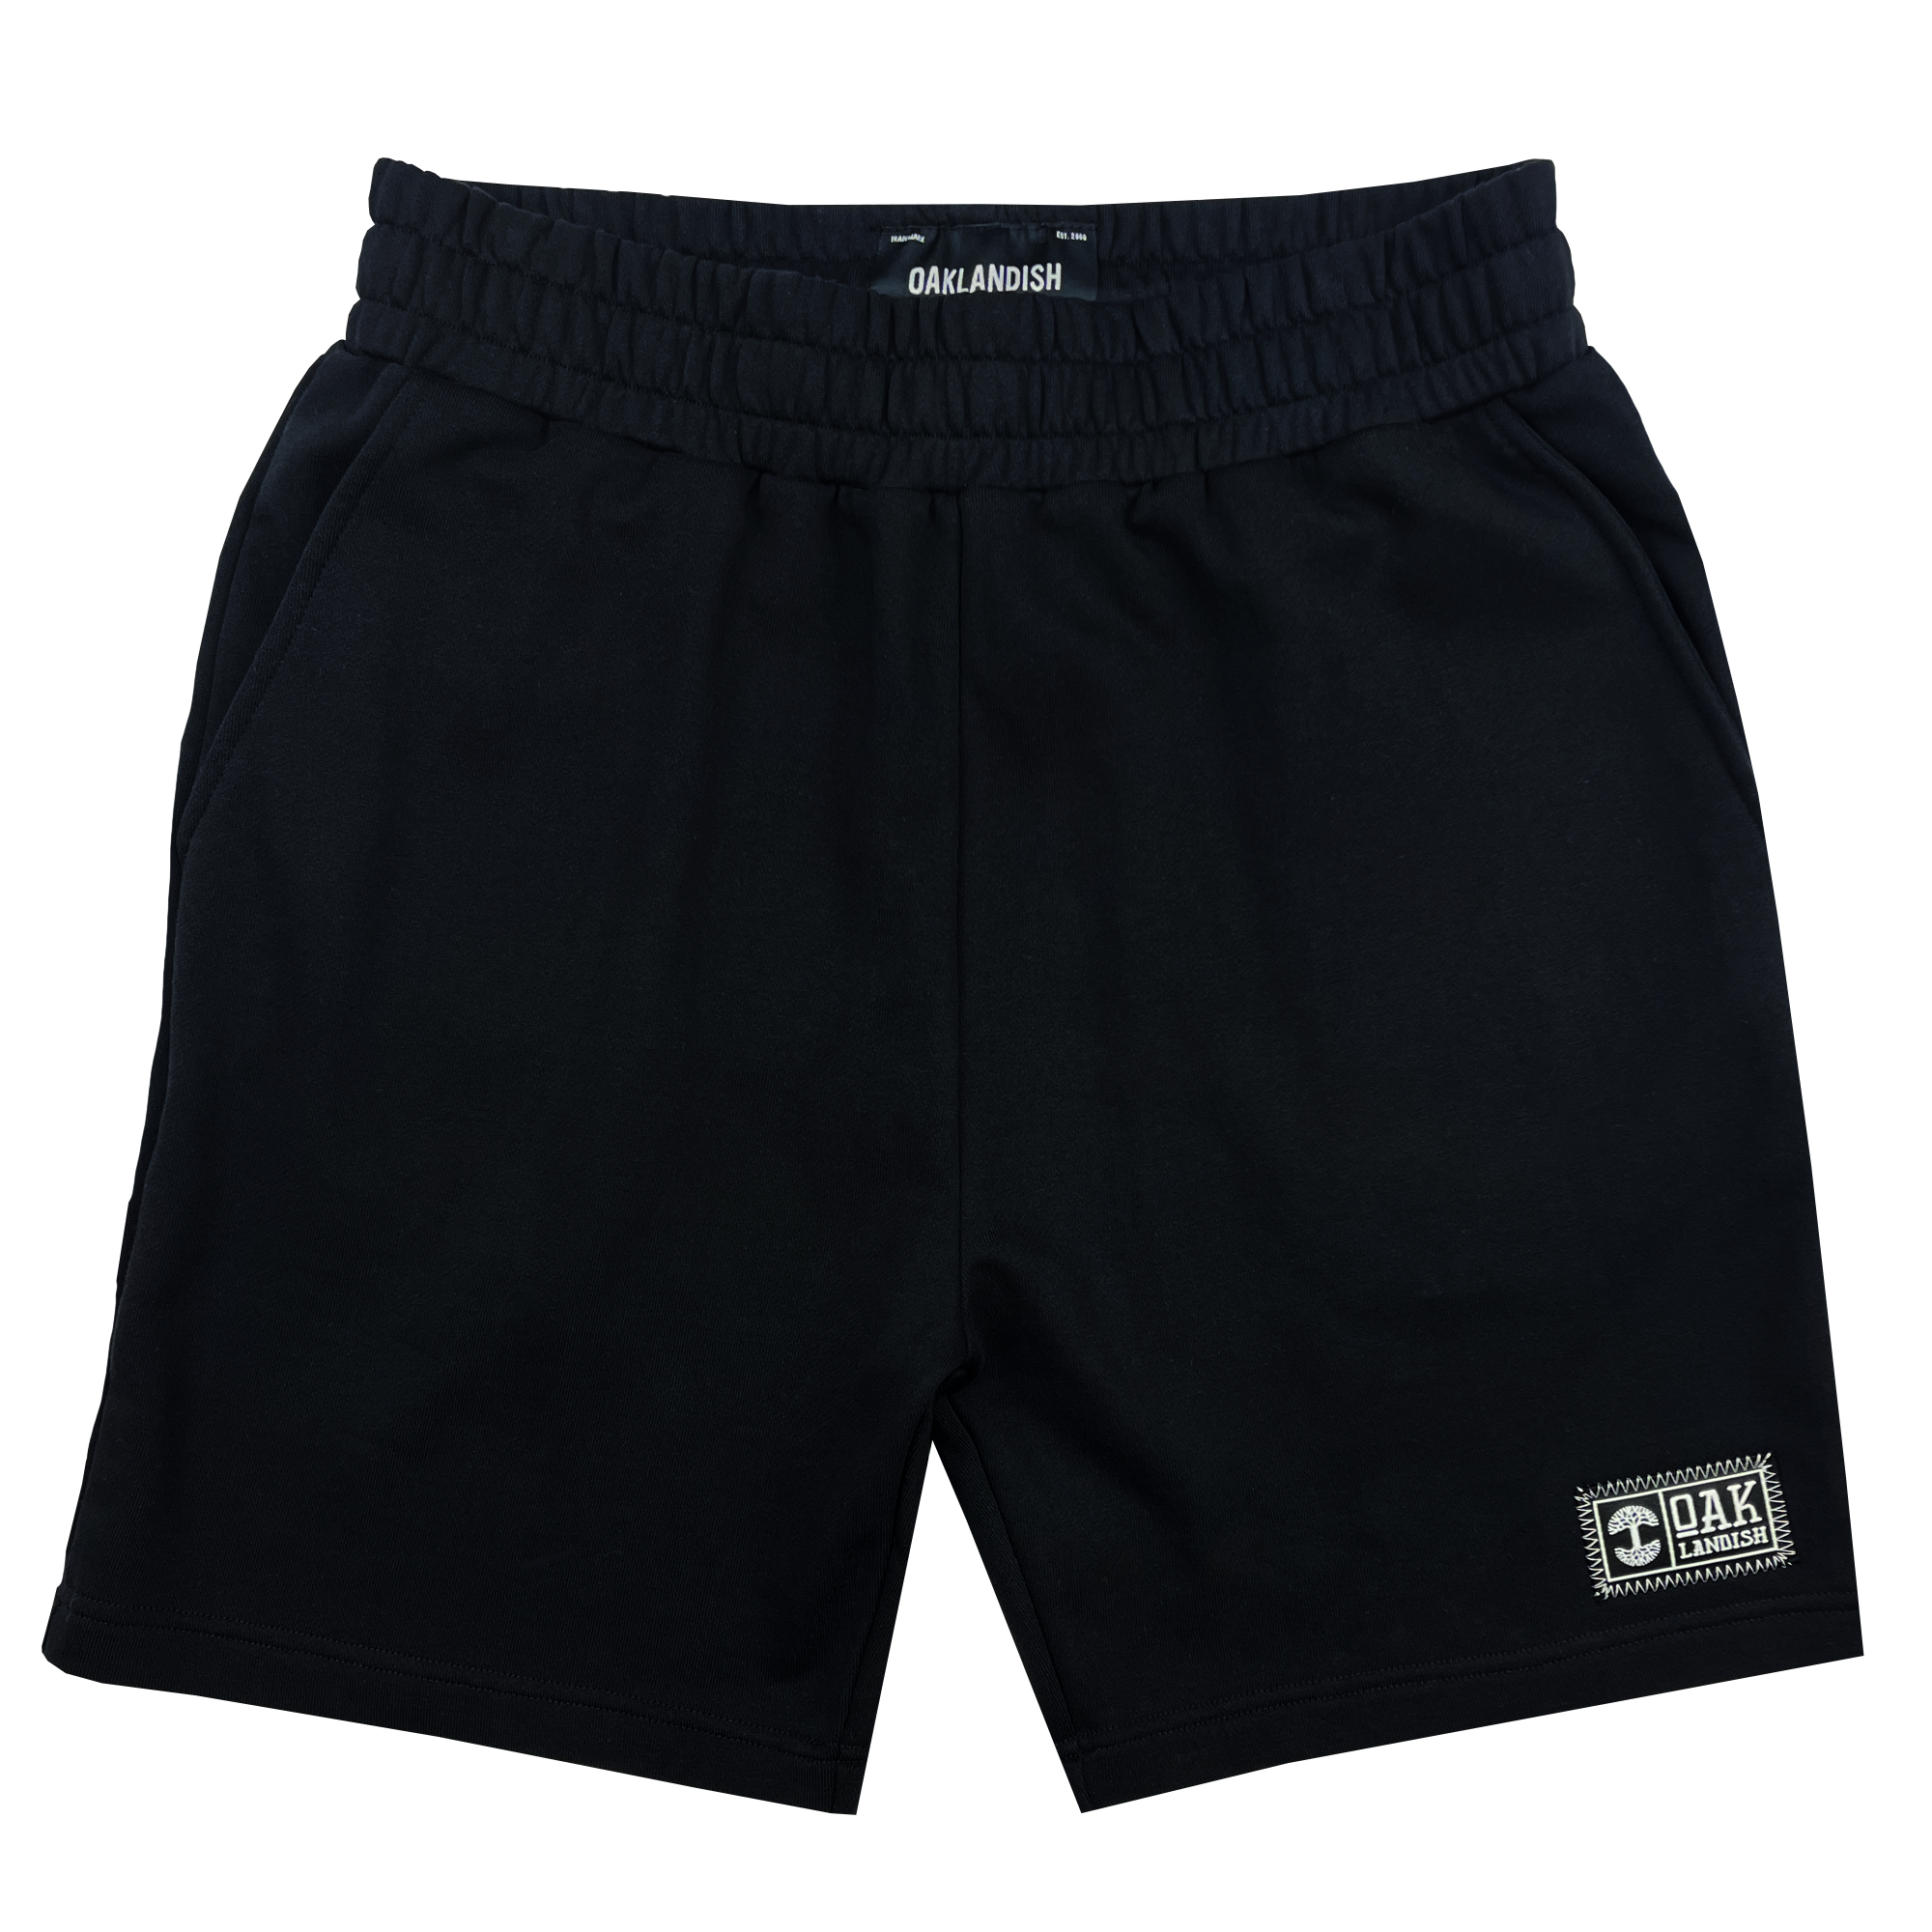  Front view of black fleece shorts with embroidered Oaklandish woven label on wearer's left leg hem.